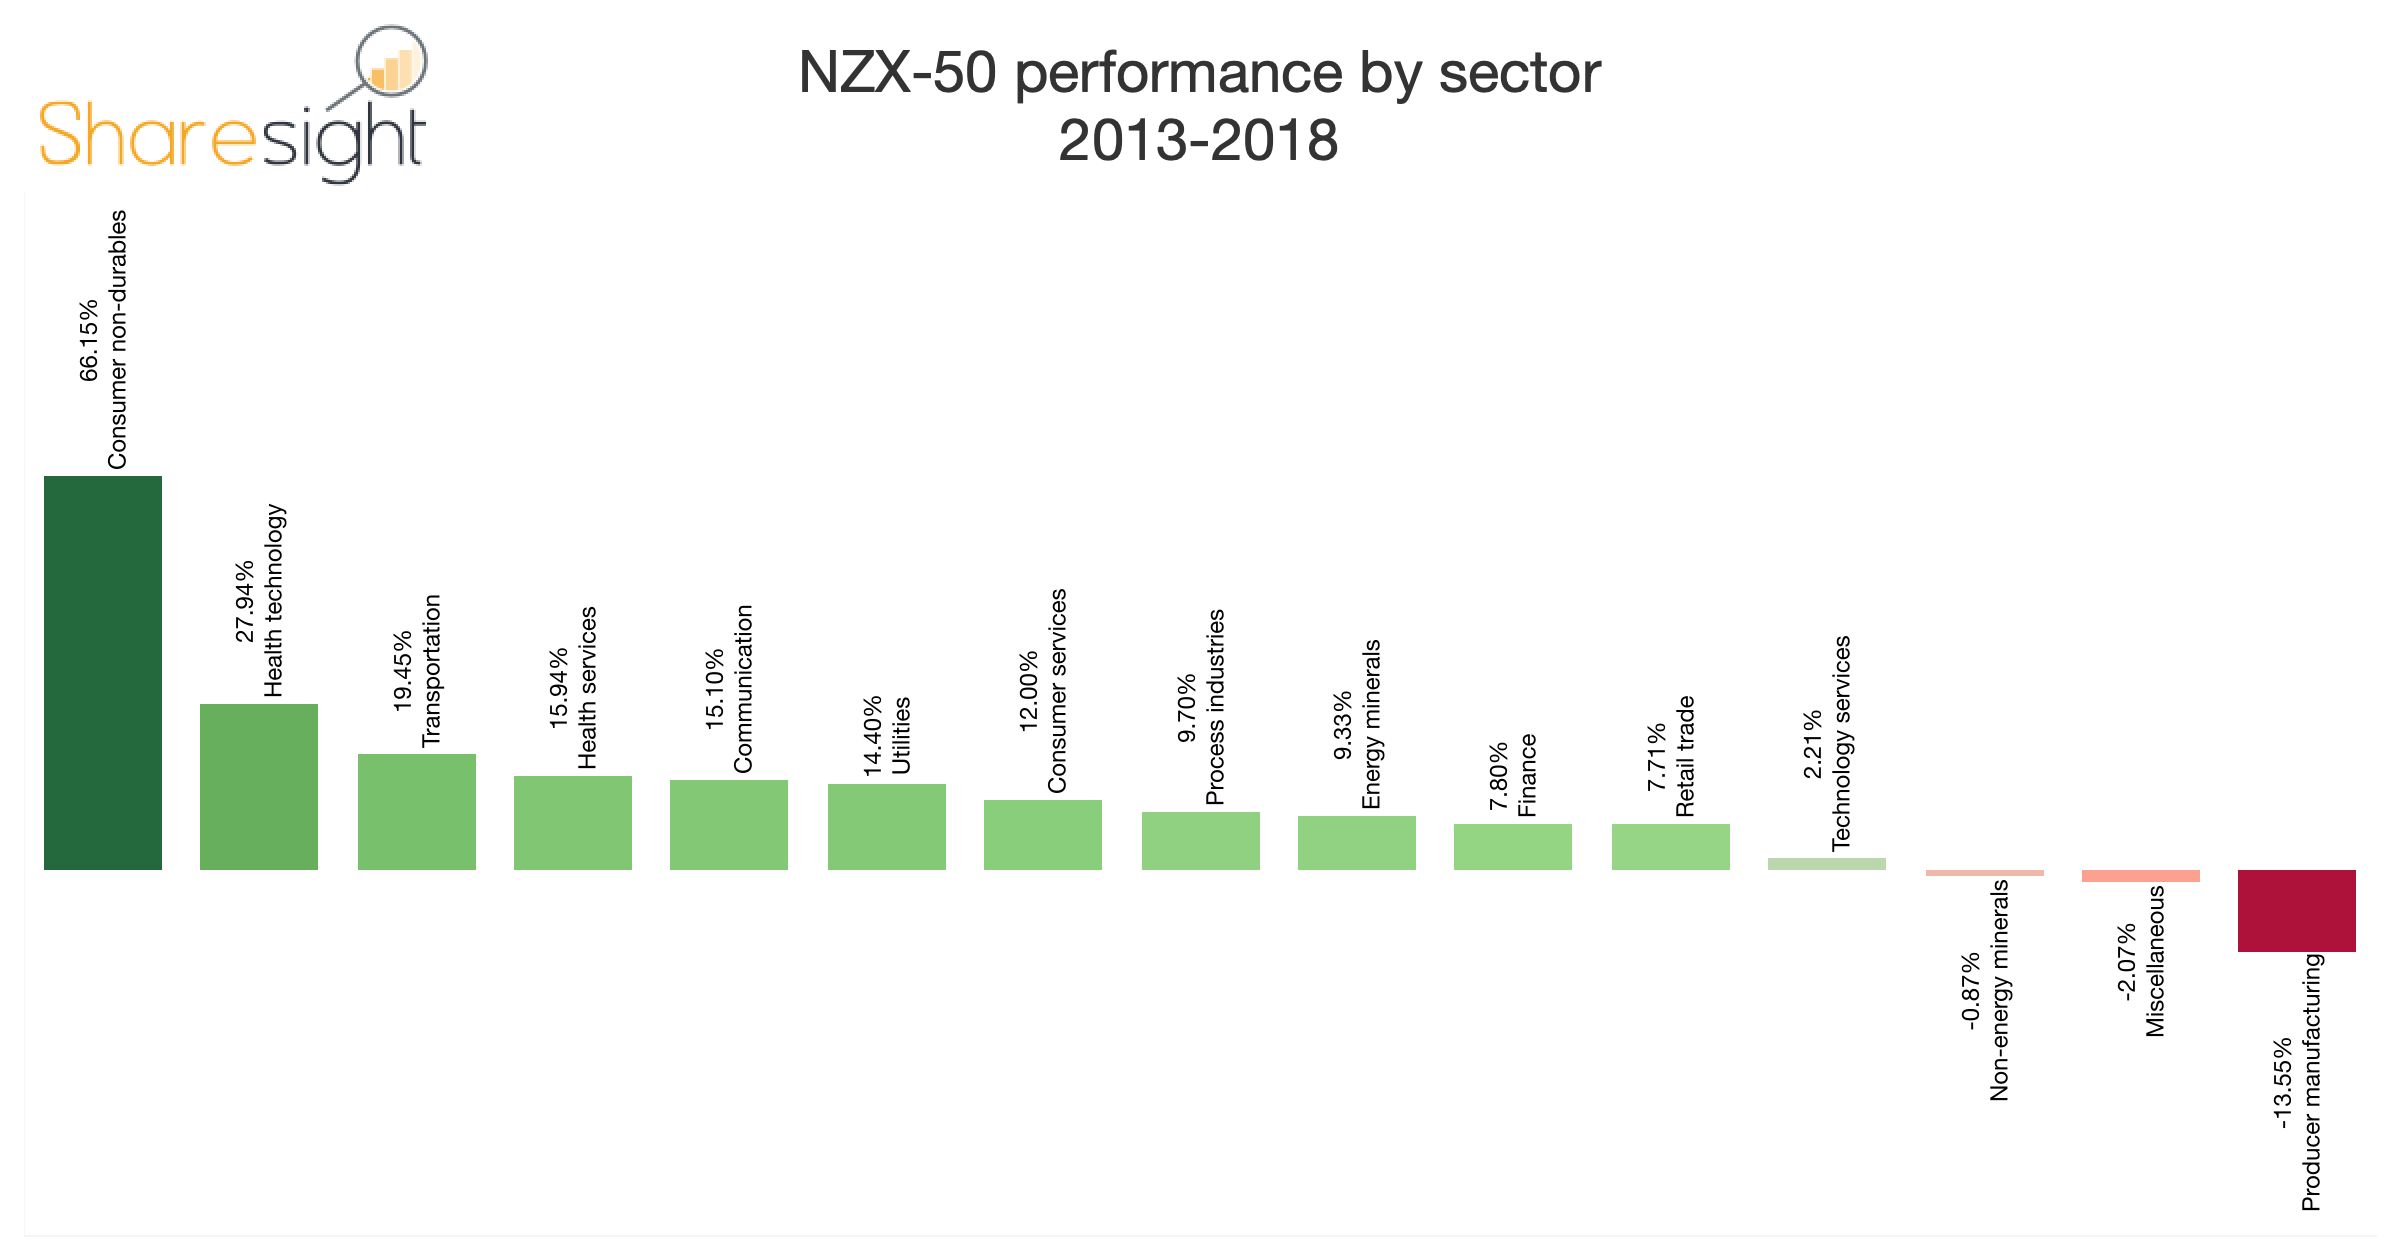 NZX-50 performance by sector compounded